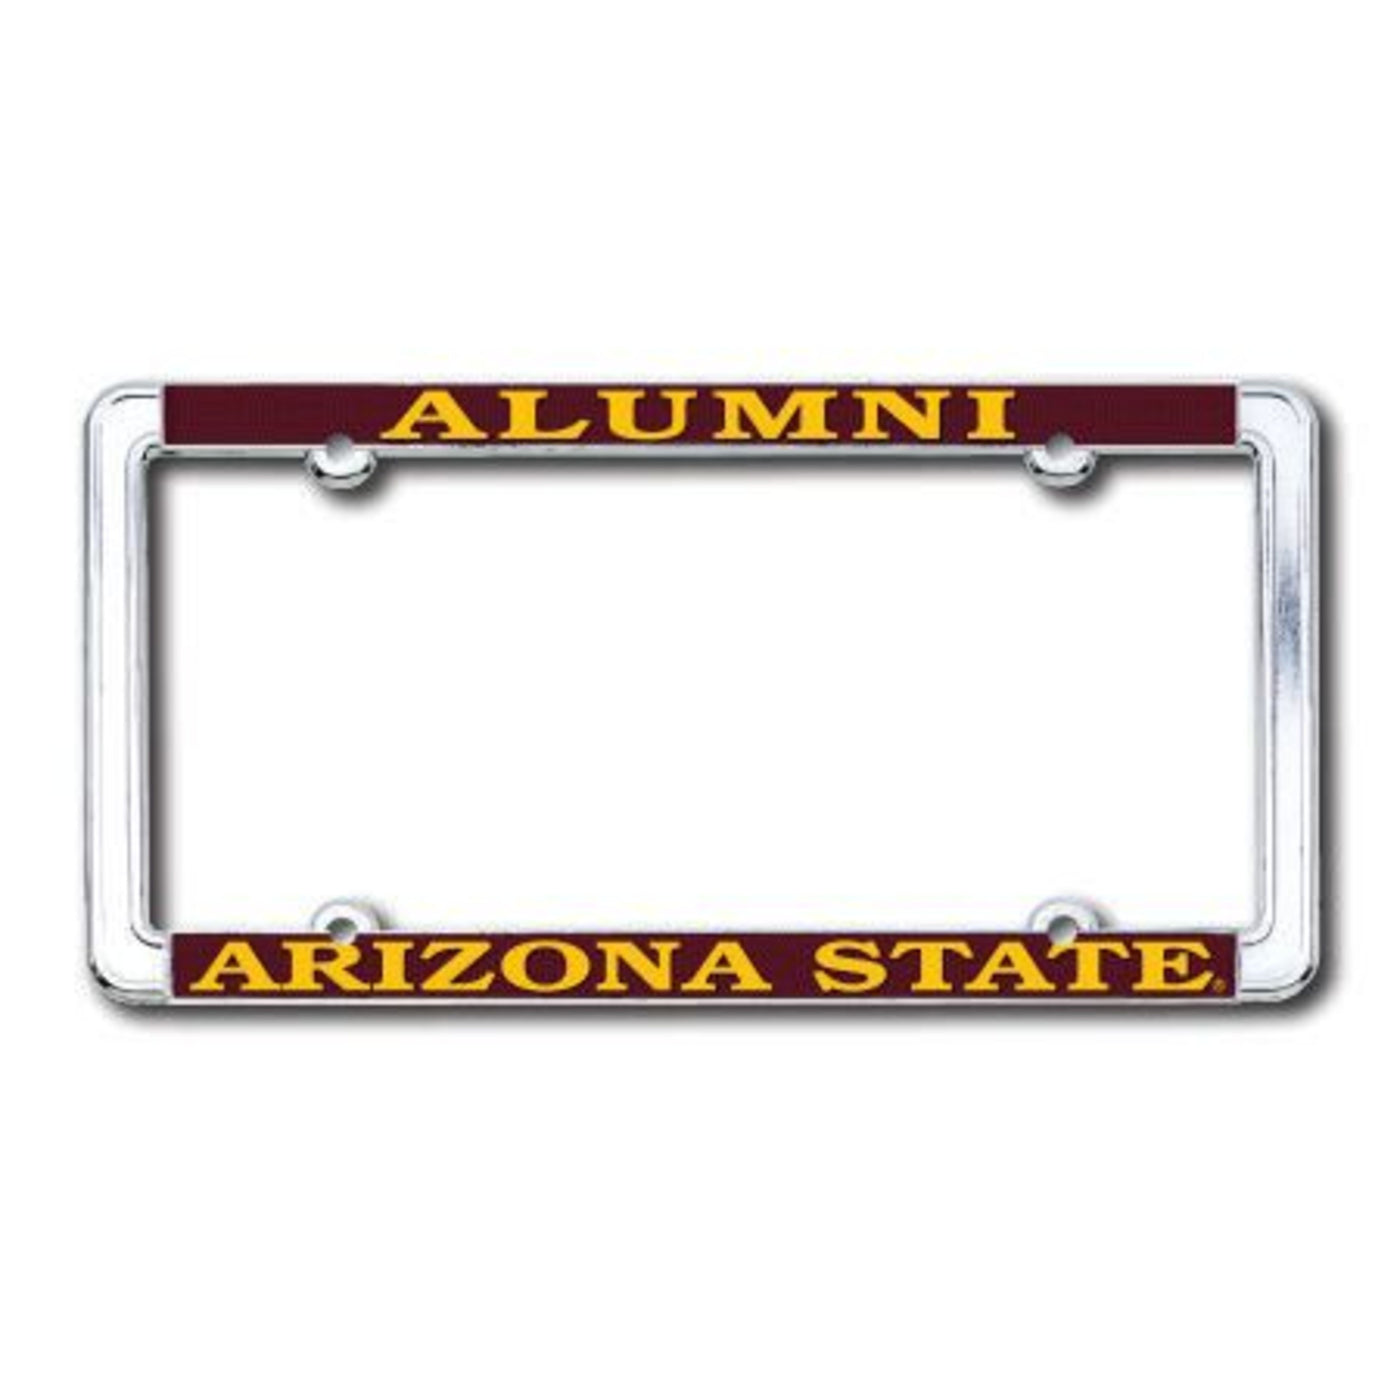 ASU metal license plate frame with maroon bottom and top and gold lettering that says 'Alumni Arizona State'